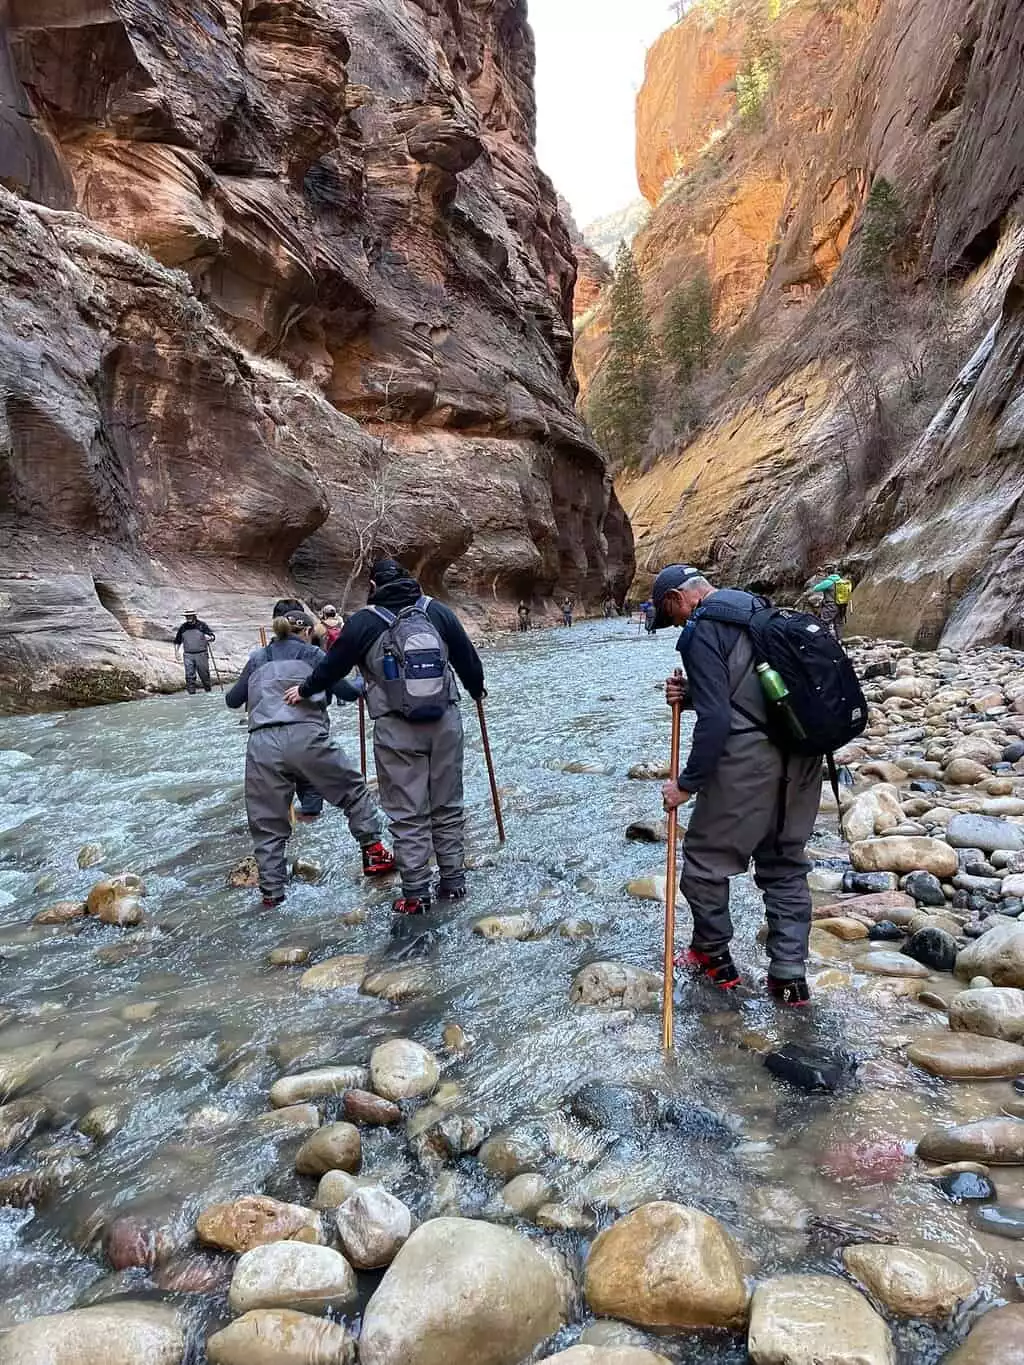 Full-Day Private Tour & Hike in Zion National Park